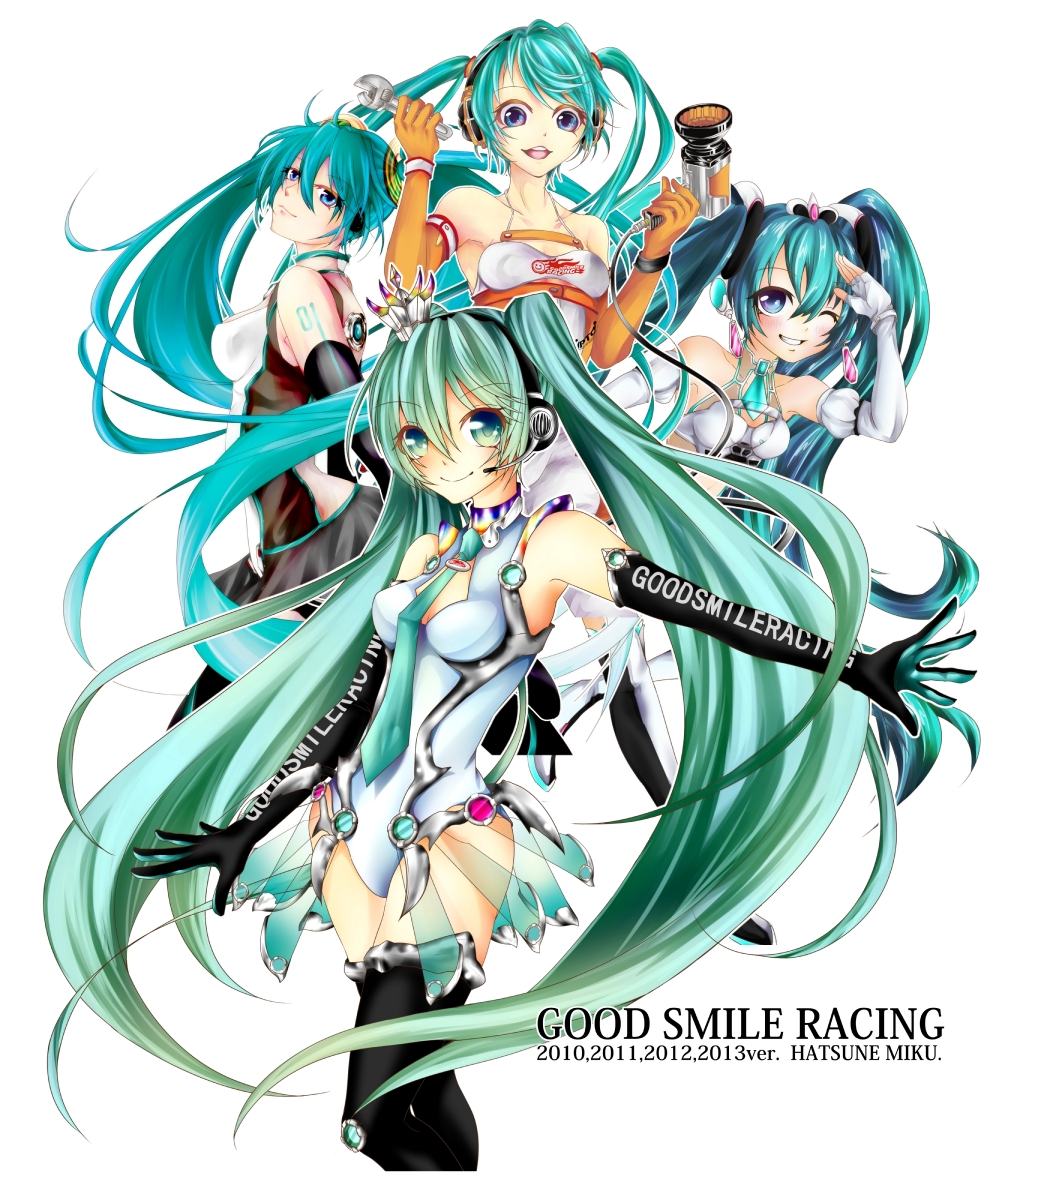 2011 2012 2013 4girls aqua_hair blue_eyes boots character_name copyright_name elbow_gloves fingerless_gloves gloves goodsmile_company goodsmile_racing green_eyes green_hair grin hatsune_miku headset highres leotard long_hair multiple_girls necktie one_eye_closed outstretched_arm race_queen racing_miku racing_miku_(2010) racing_miku_(2011) racing_miku_(2012) racing_miku_(2013) reika010 salute smile tattoo thigh_boots thighhighs twintails very_long_hair vocaloid wrench